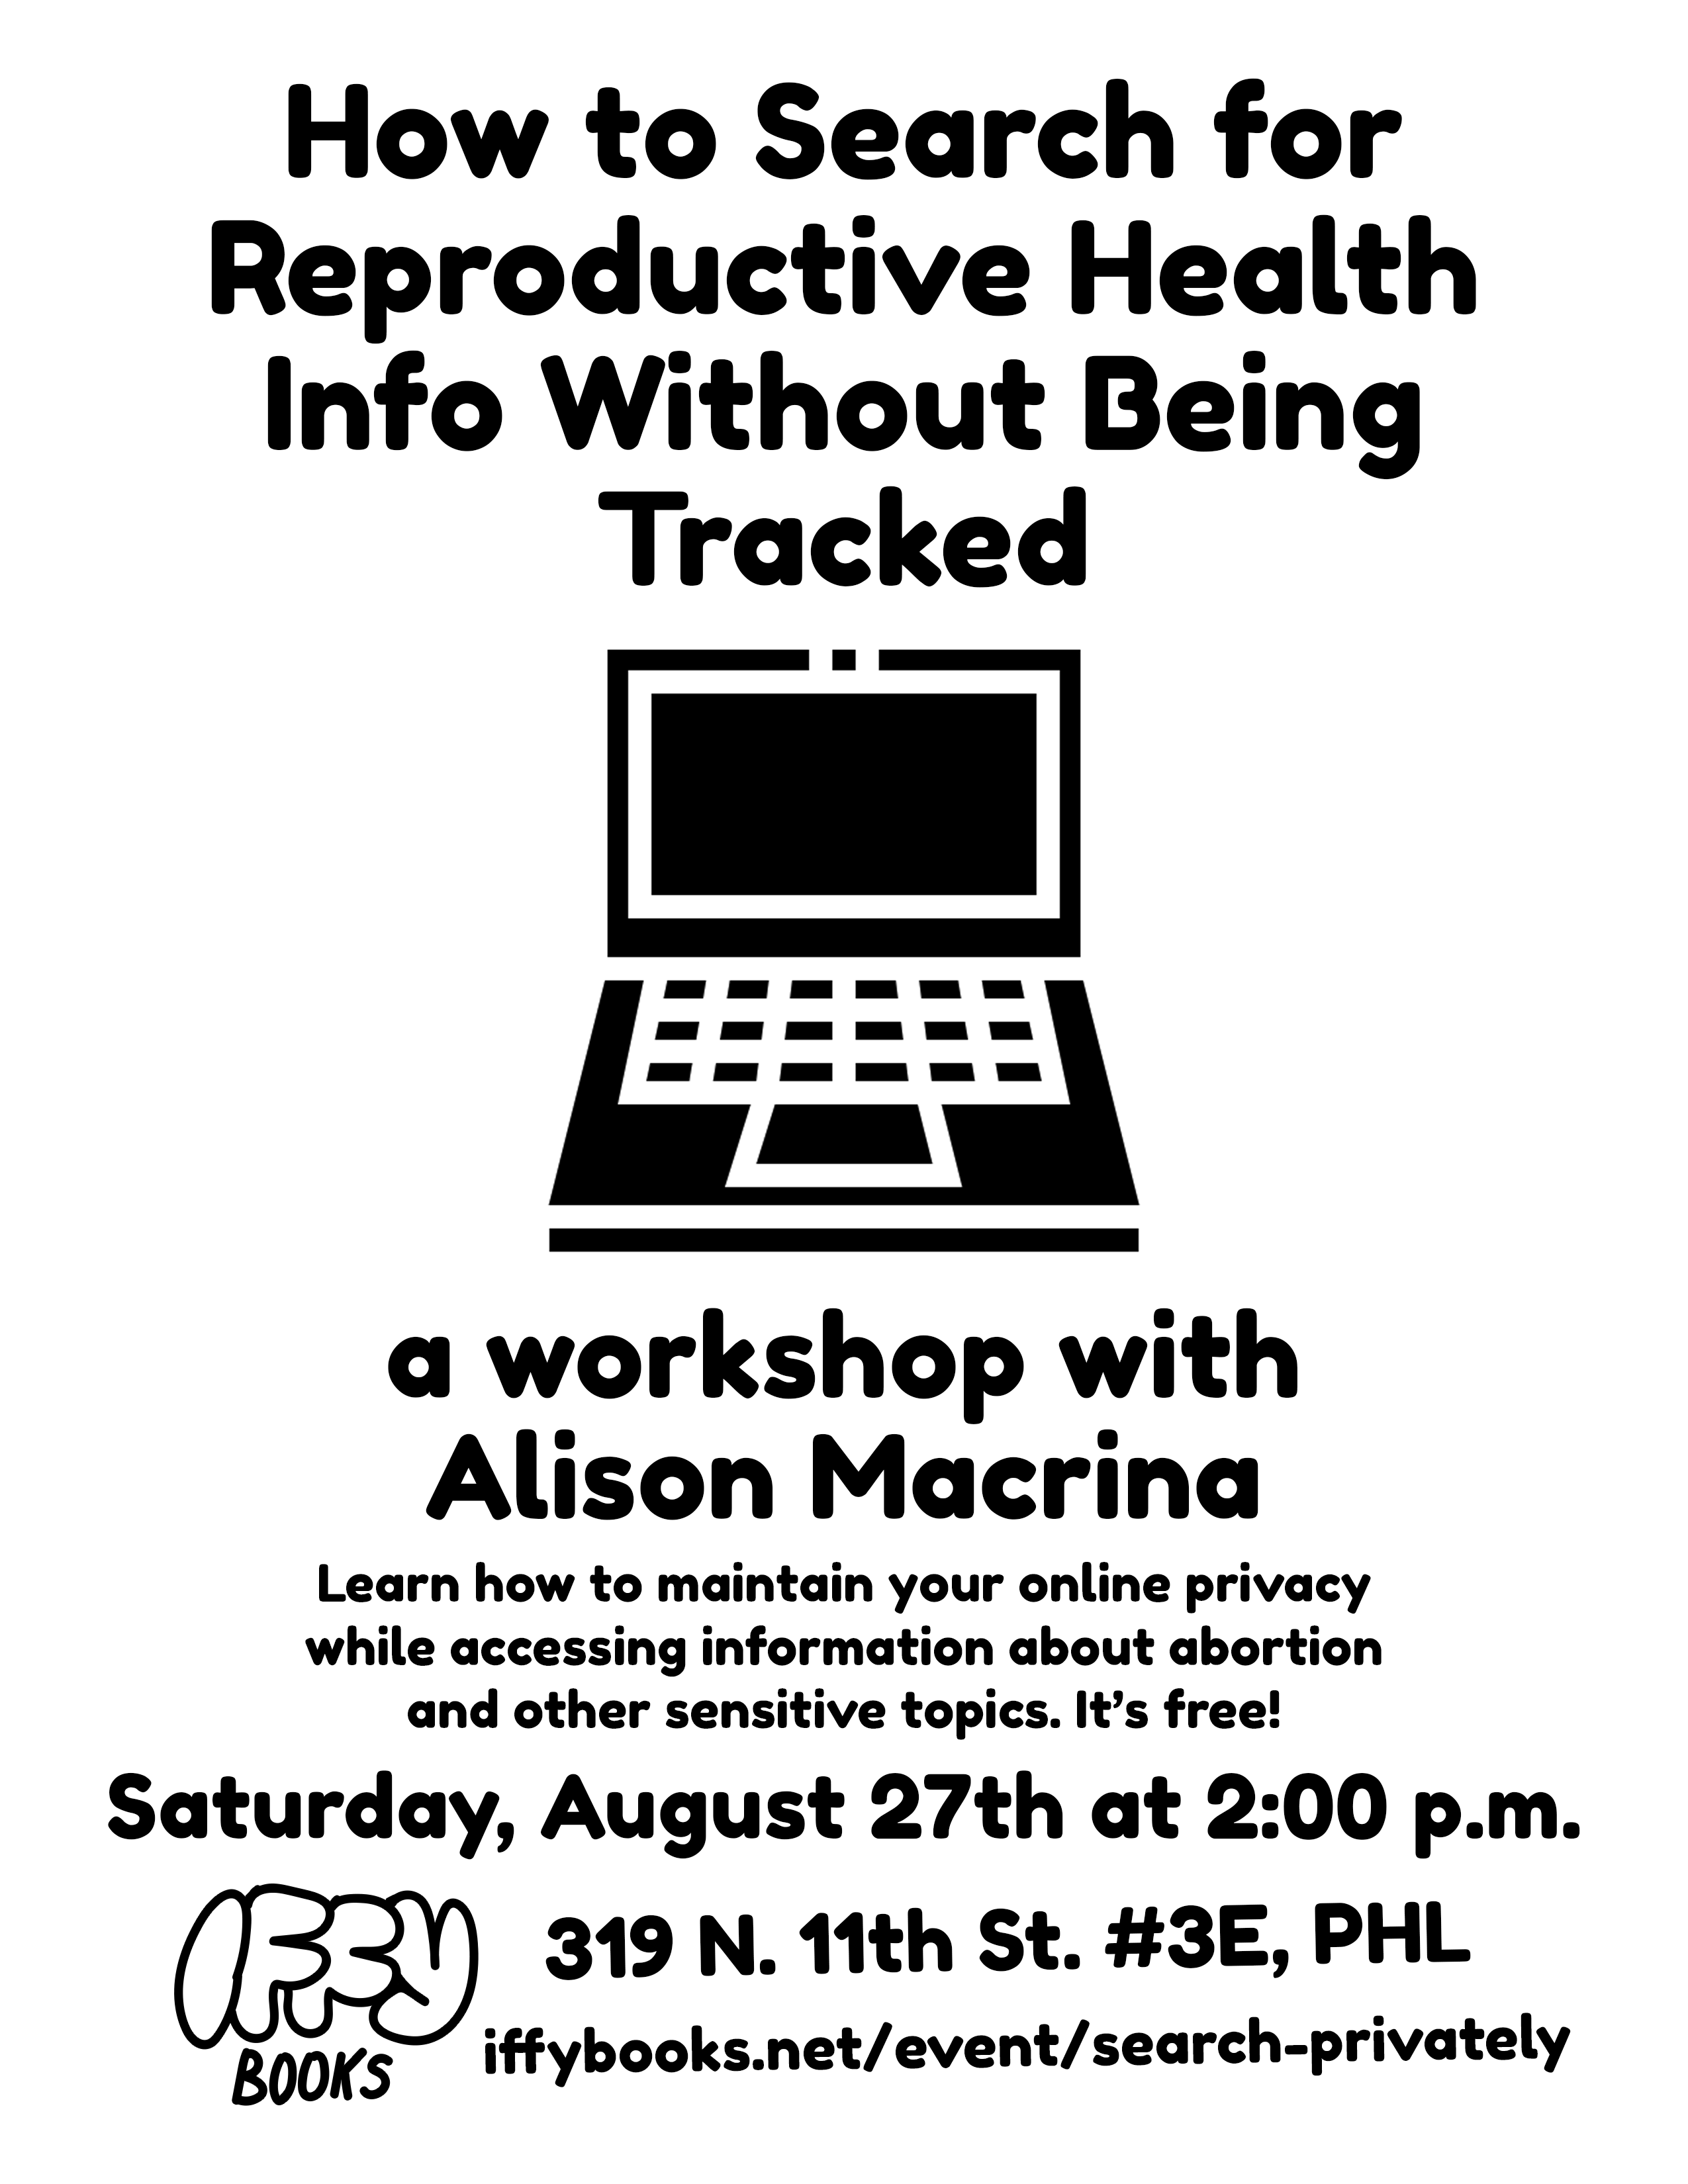 On Saturday, 8/27 at 2:00 p.m. Alison Macrina (@flexlibris) is leading a workshop called "How to Search for Reproductive Health Info Without Being Tracked." We aren't doing registration, so mark your calendar!